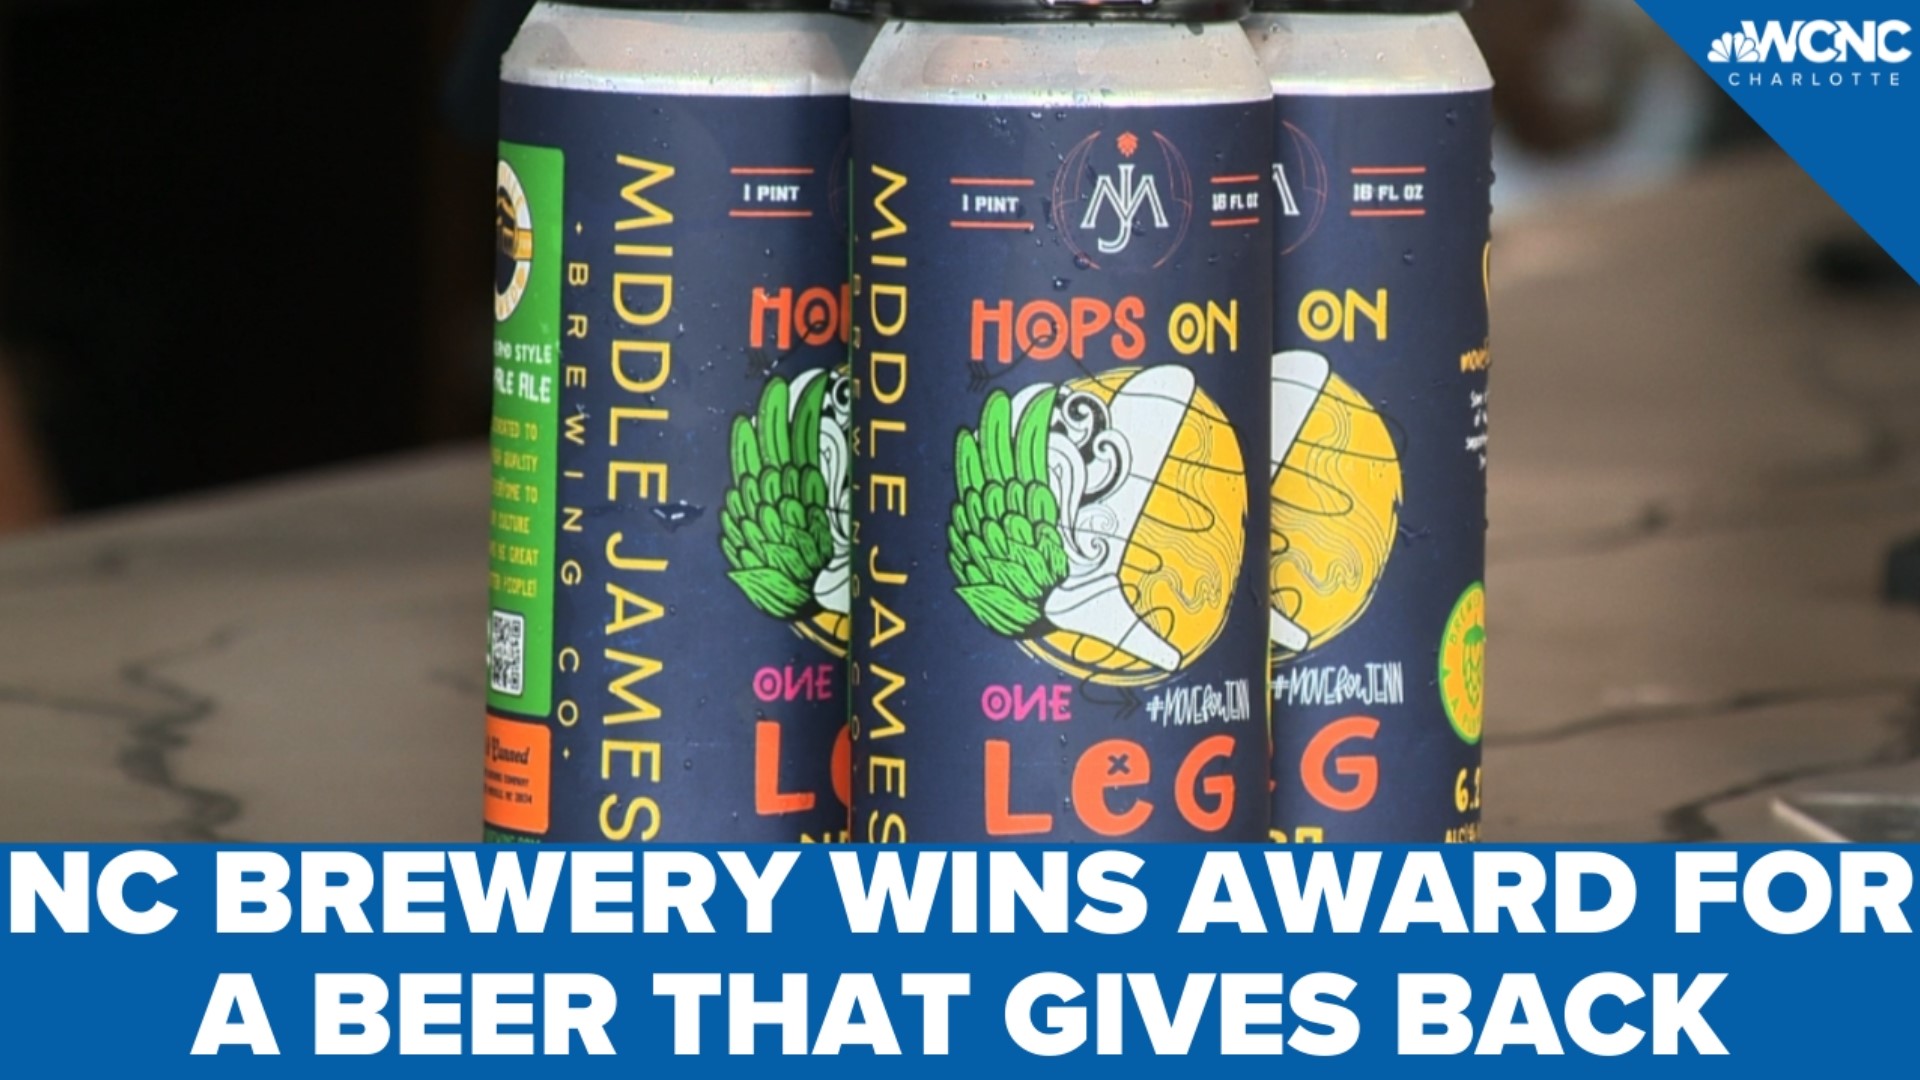 Co-owner and brewer Andrew Viapiano said Middle James Brewing has won three awards this year, but the win for "Hops on One Leg" tastes sweeter.